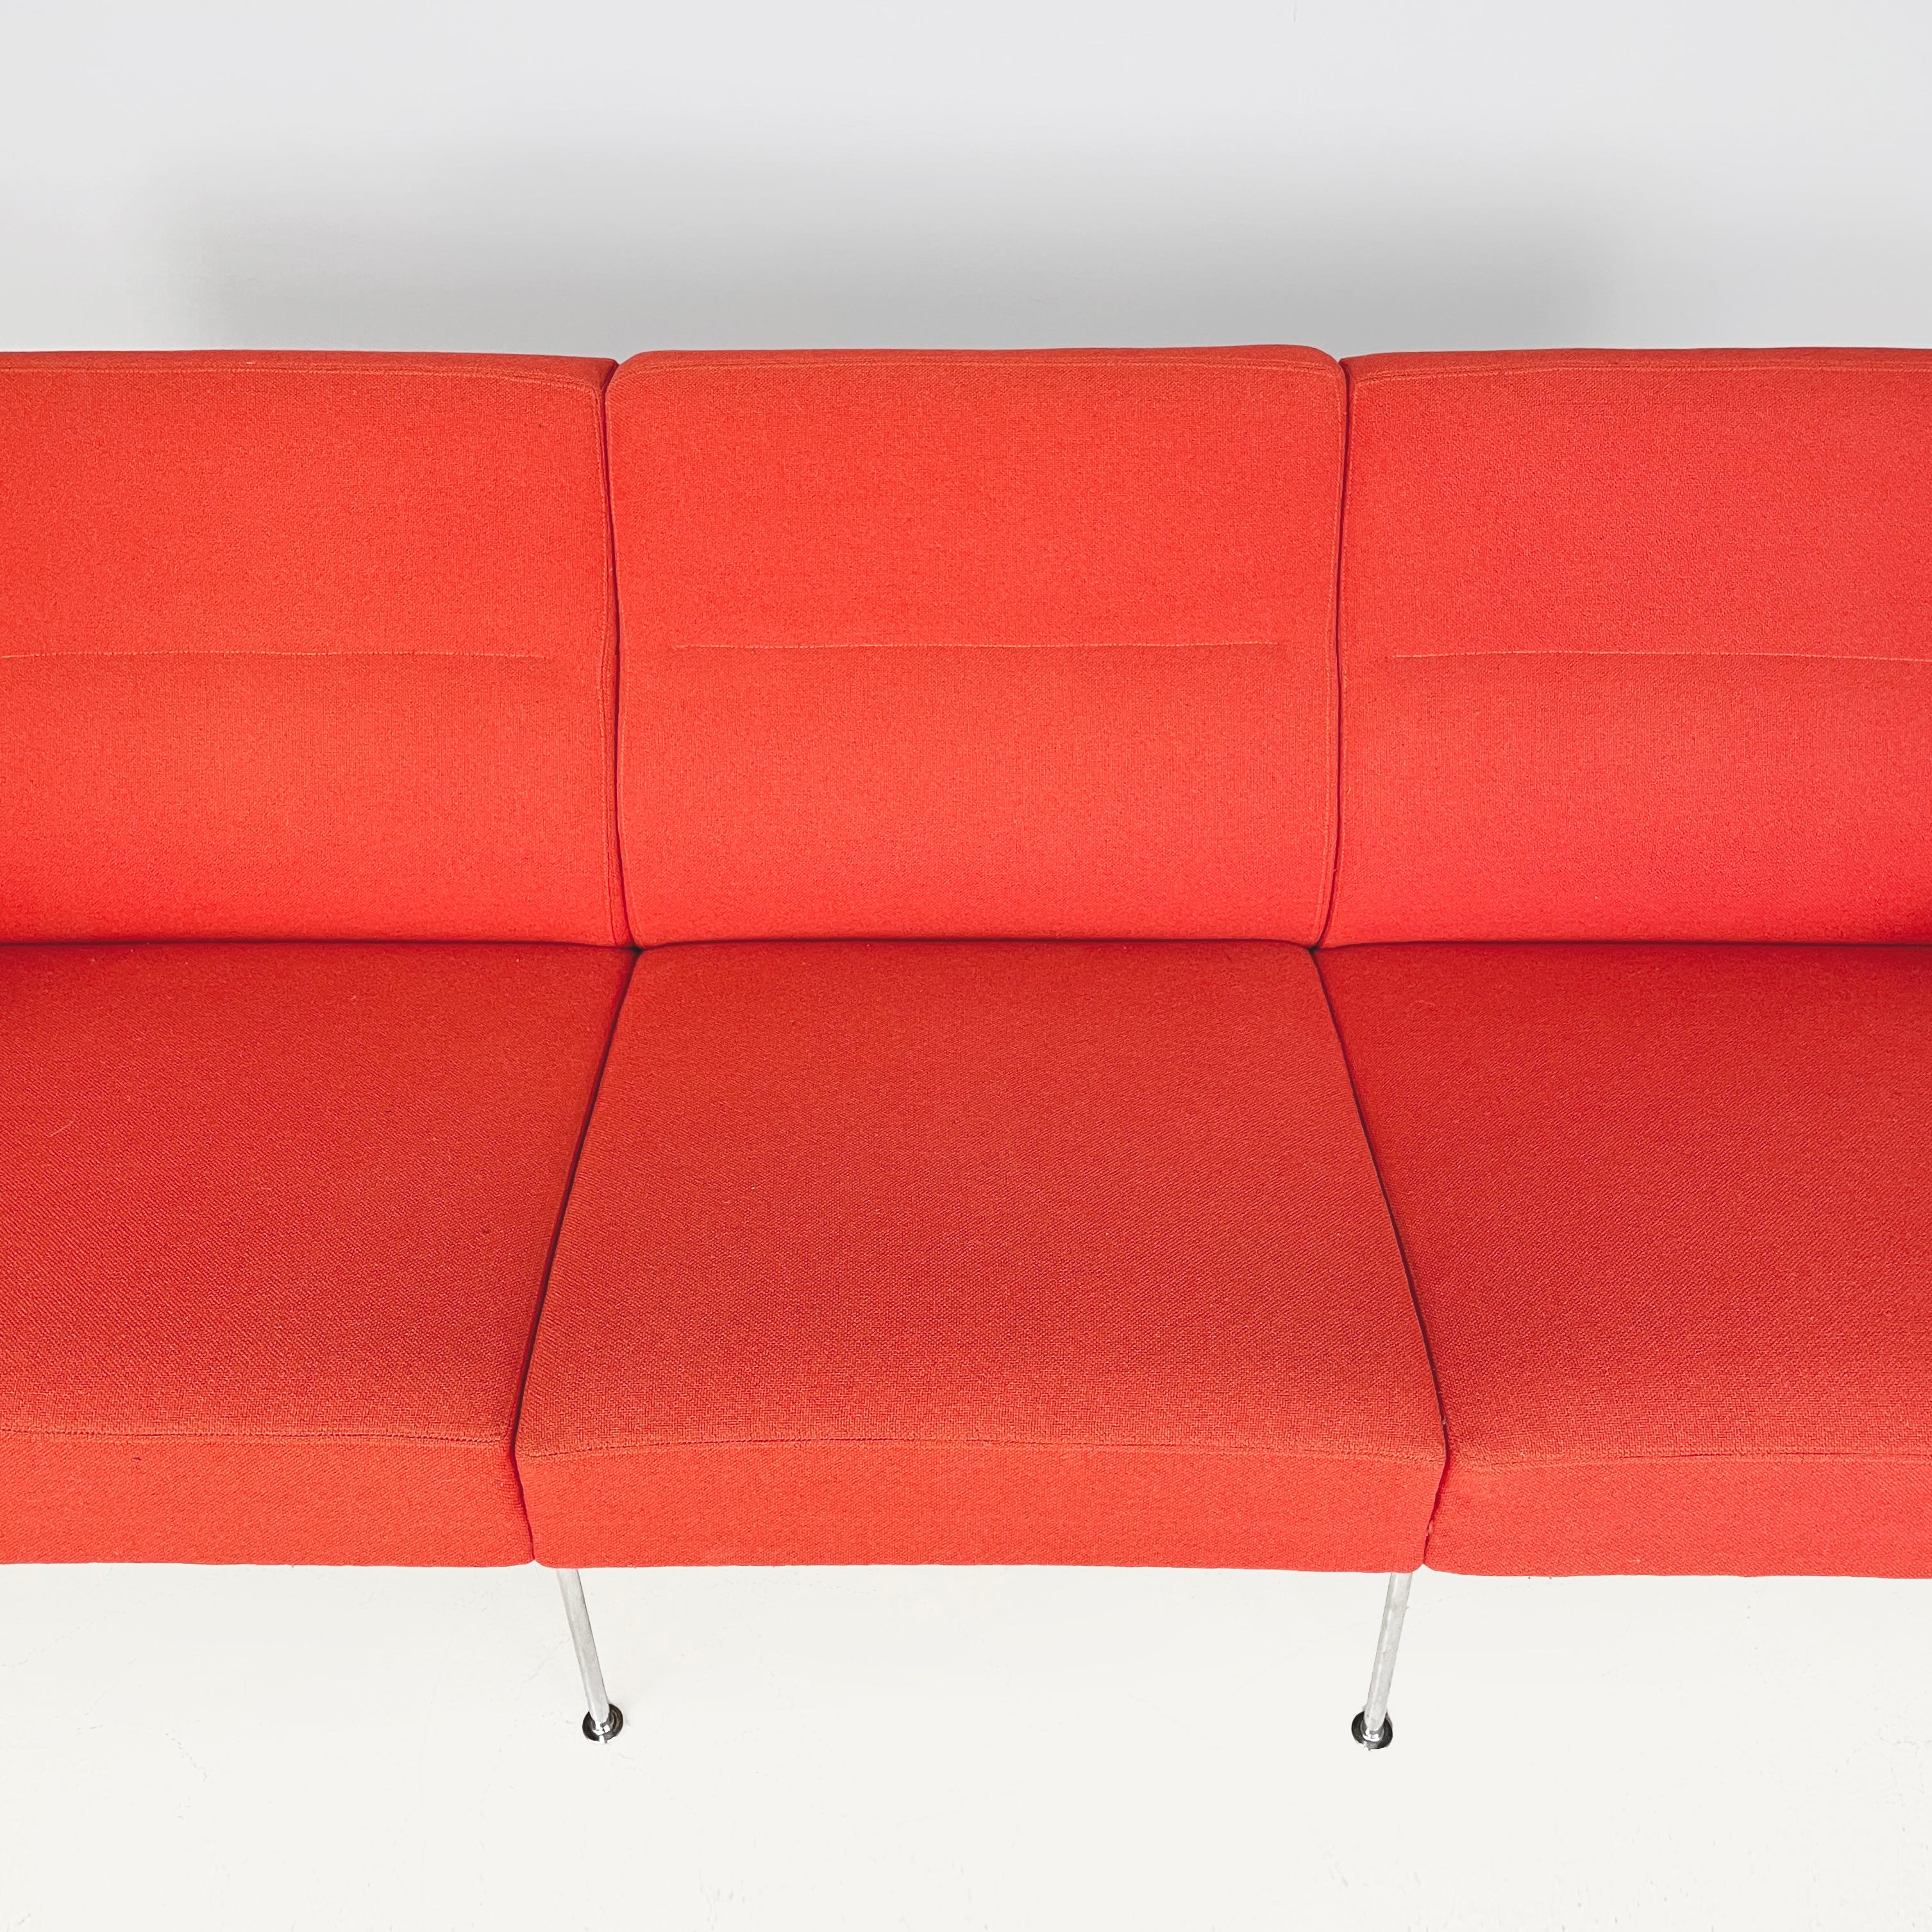 Late 20th Century Denmark Three-seater sofa 3303 Airport by Arne Jacobsen for Fritz Hansen, 1993 For Sale